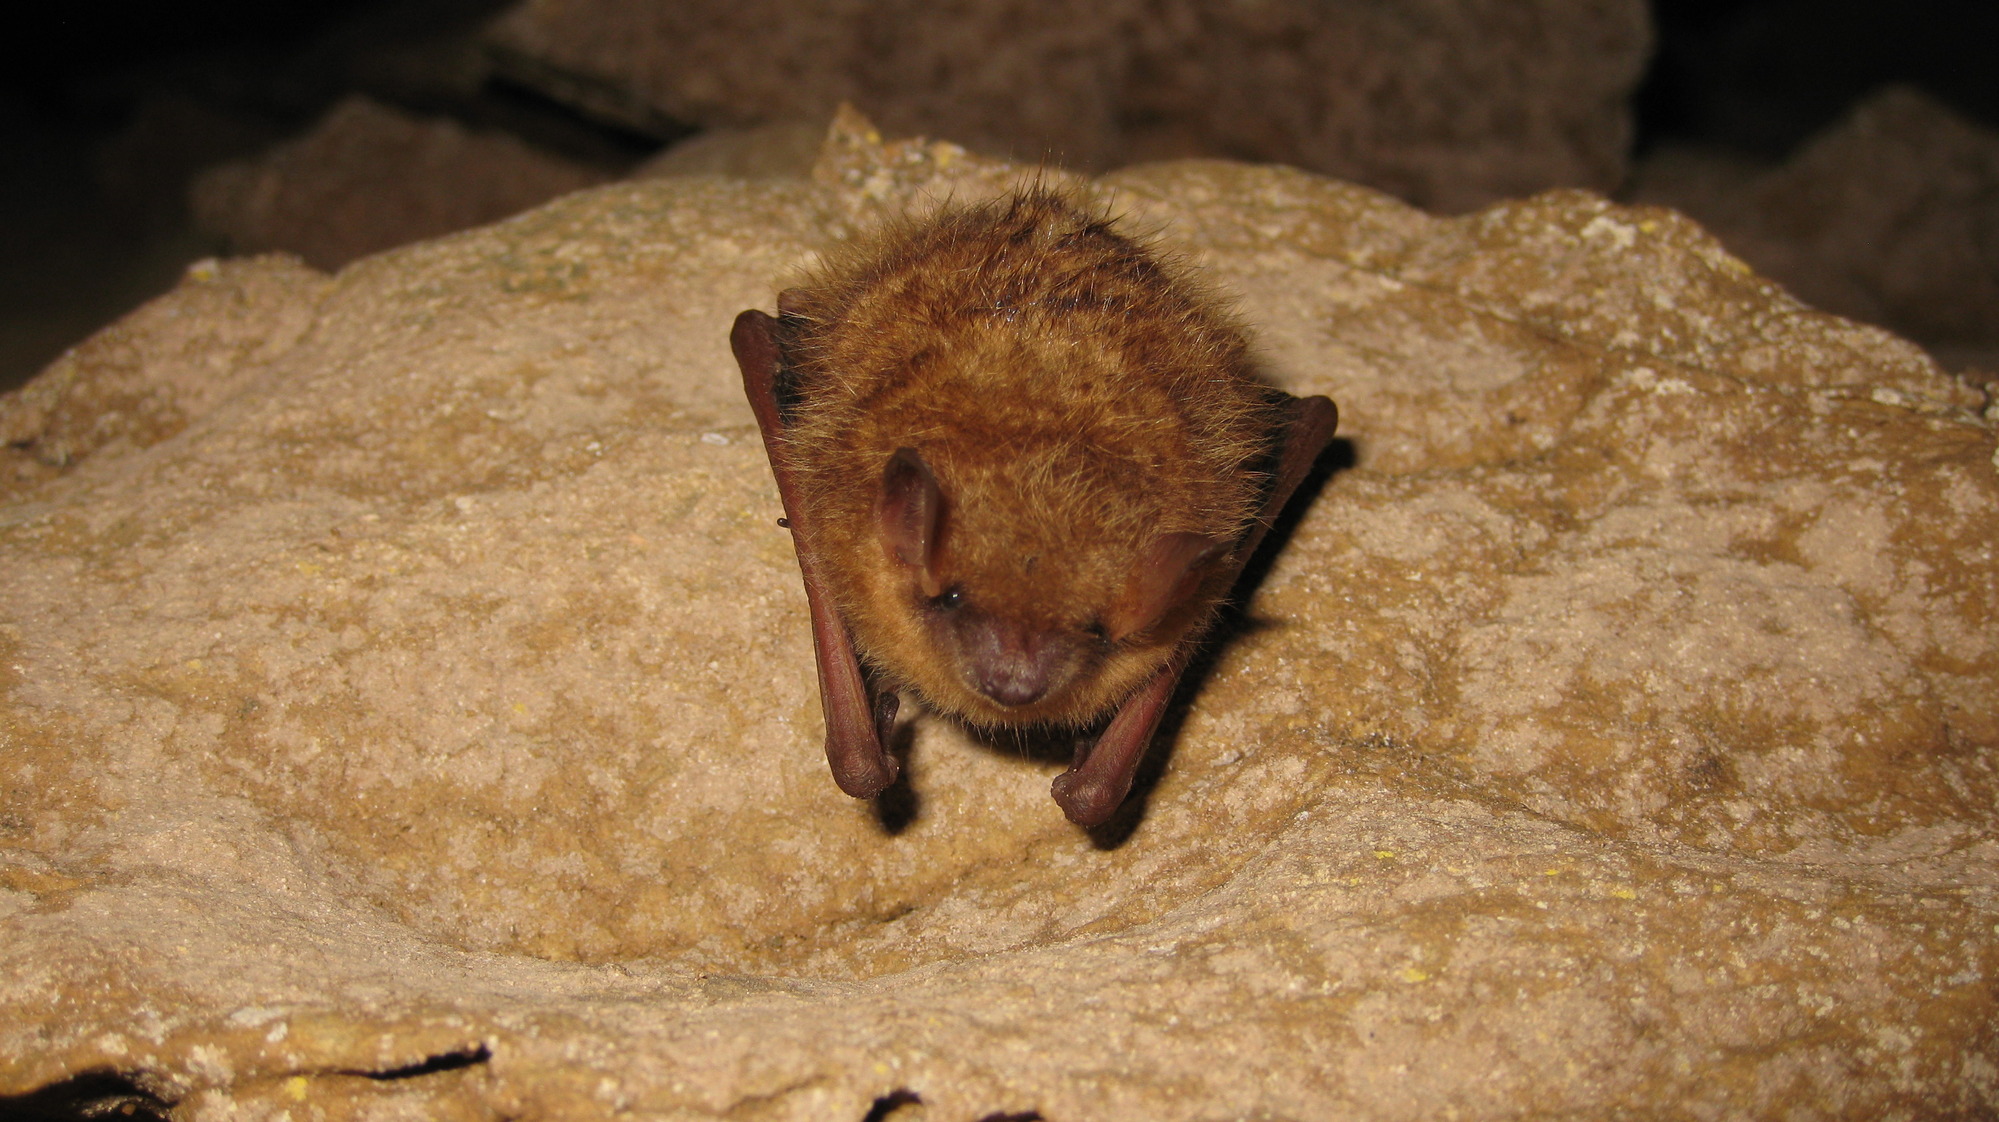 Tricolored bat hanging on a rock